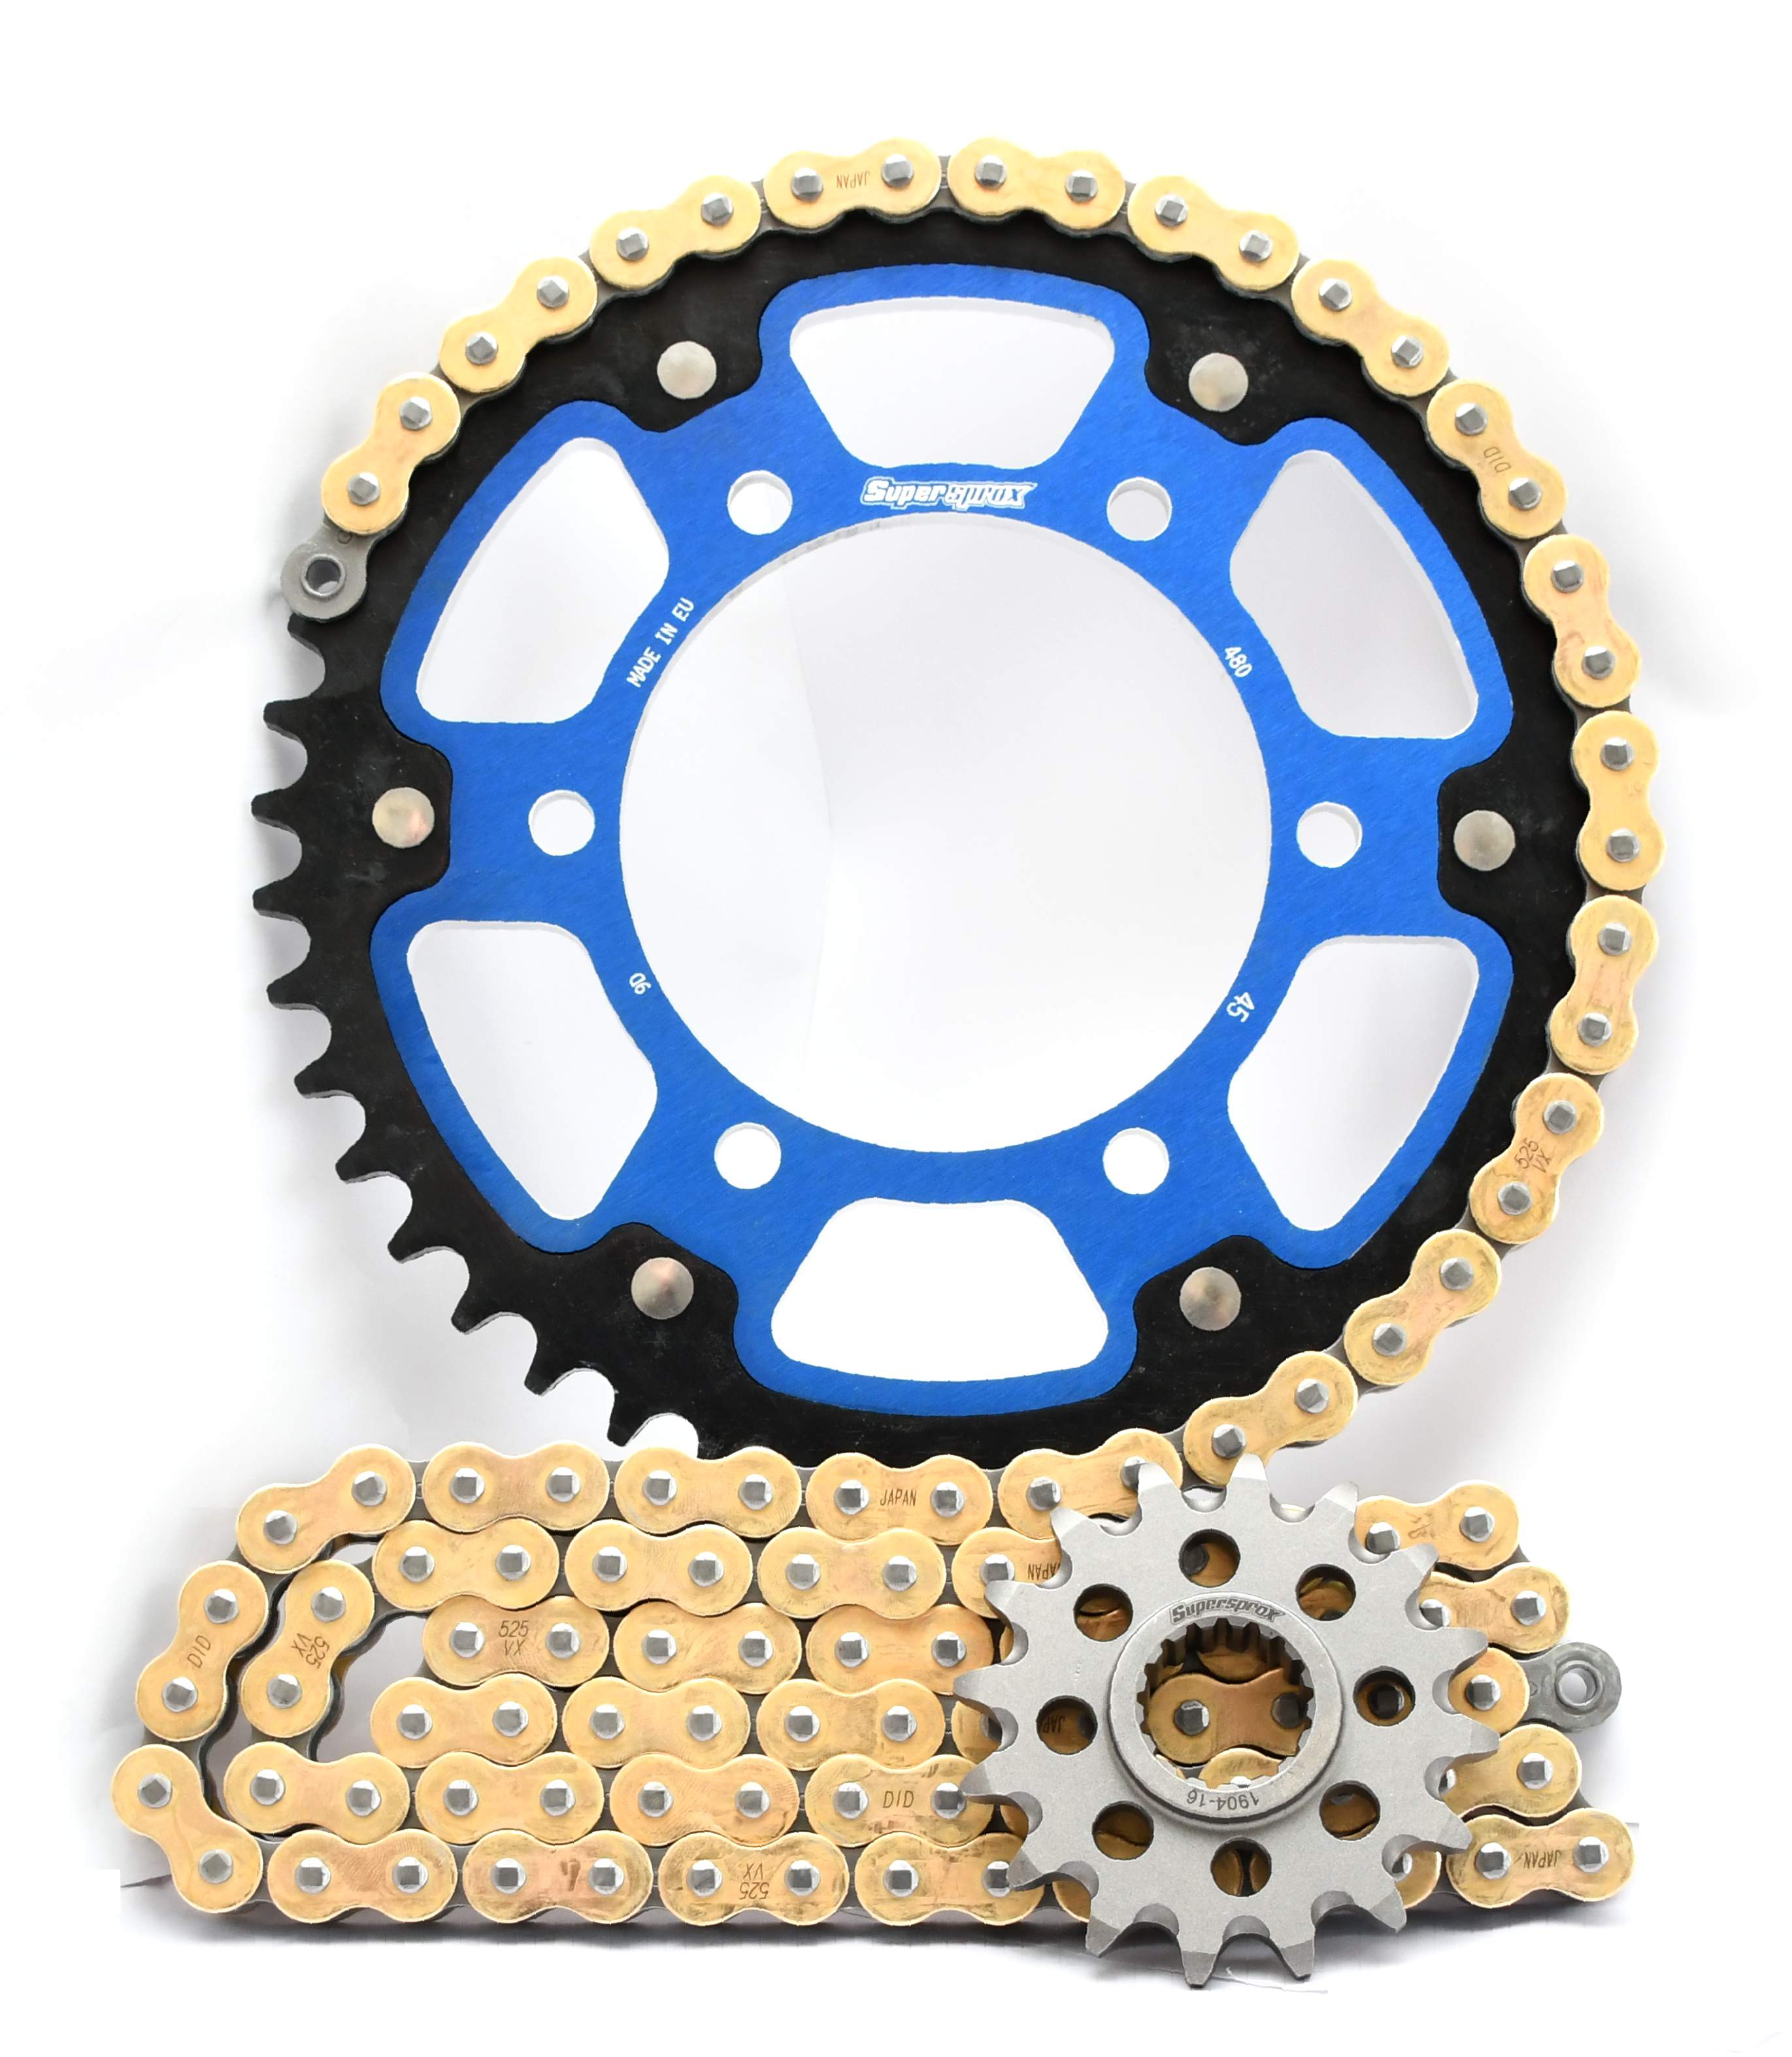 Supersprox Chain & Sprocket Kit for Yamaha YZF R1 1998-2003 - Standard Gearing - 0